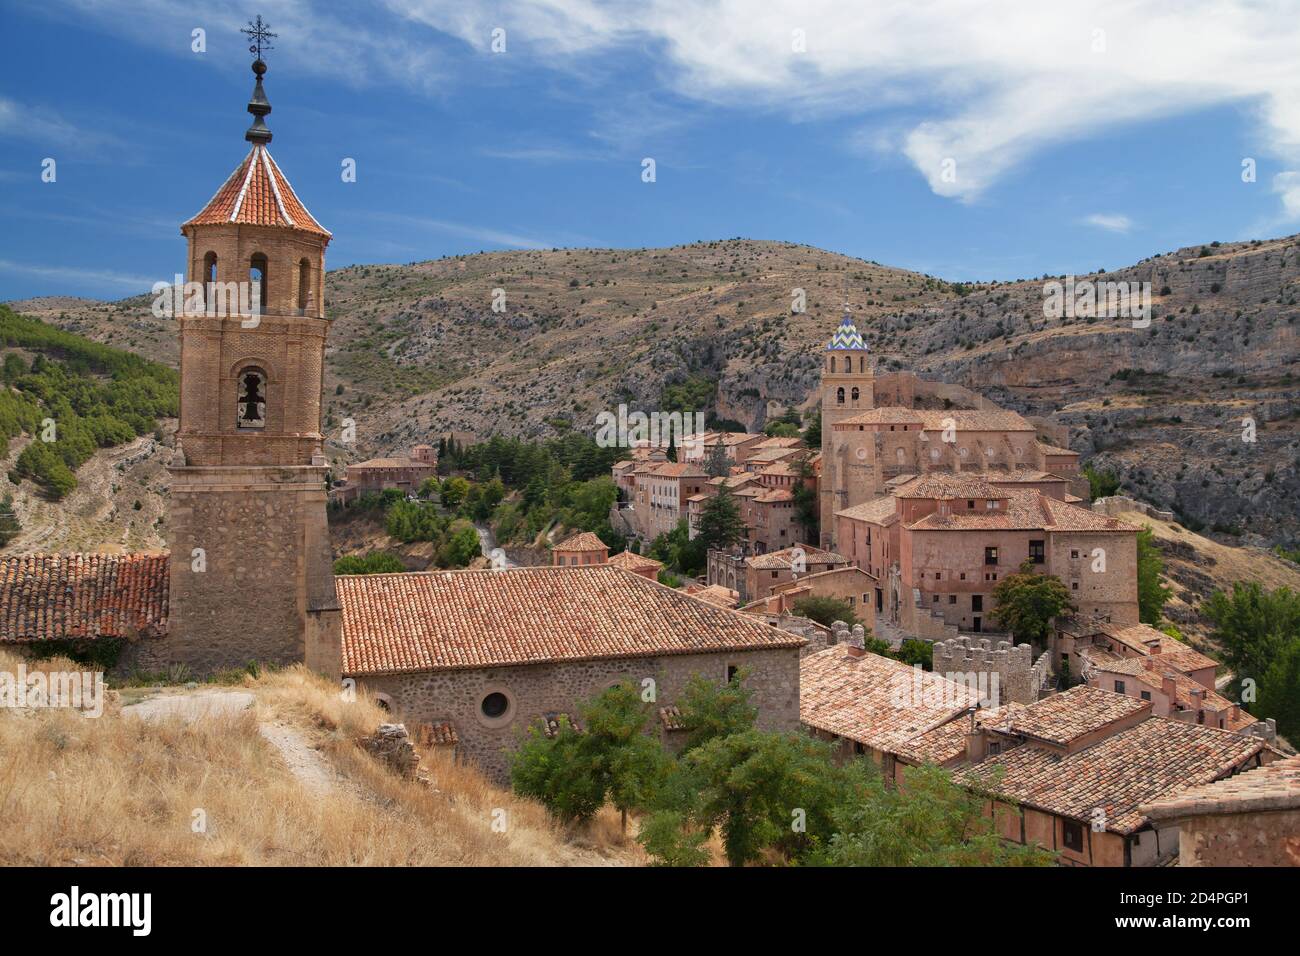 Santiago Church and Cathedral District of Albarracin, Teruel, Spain. Stock Photo